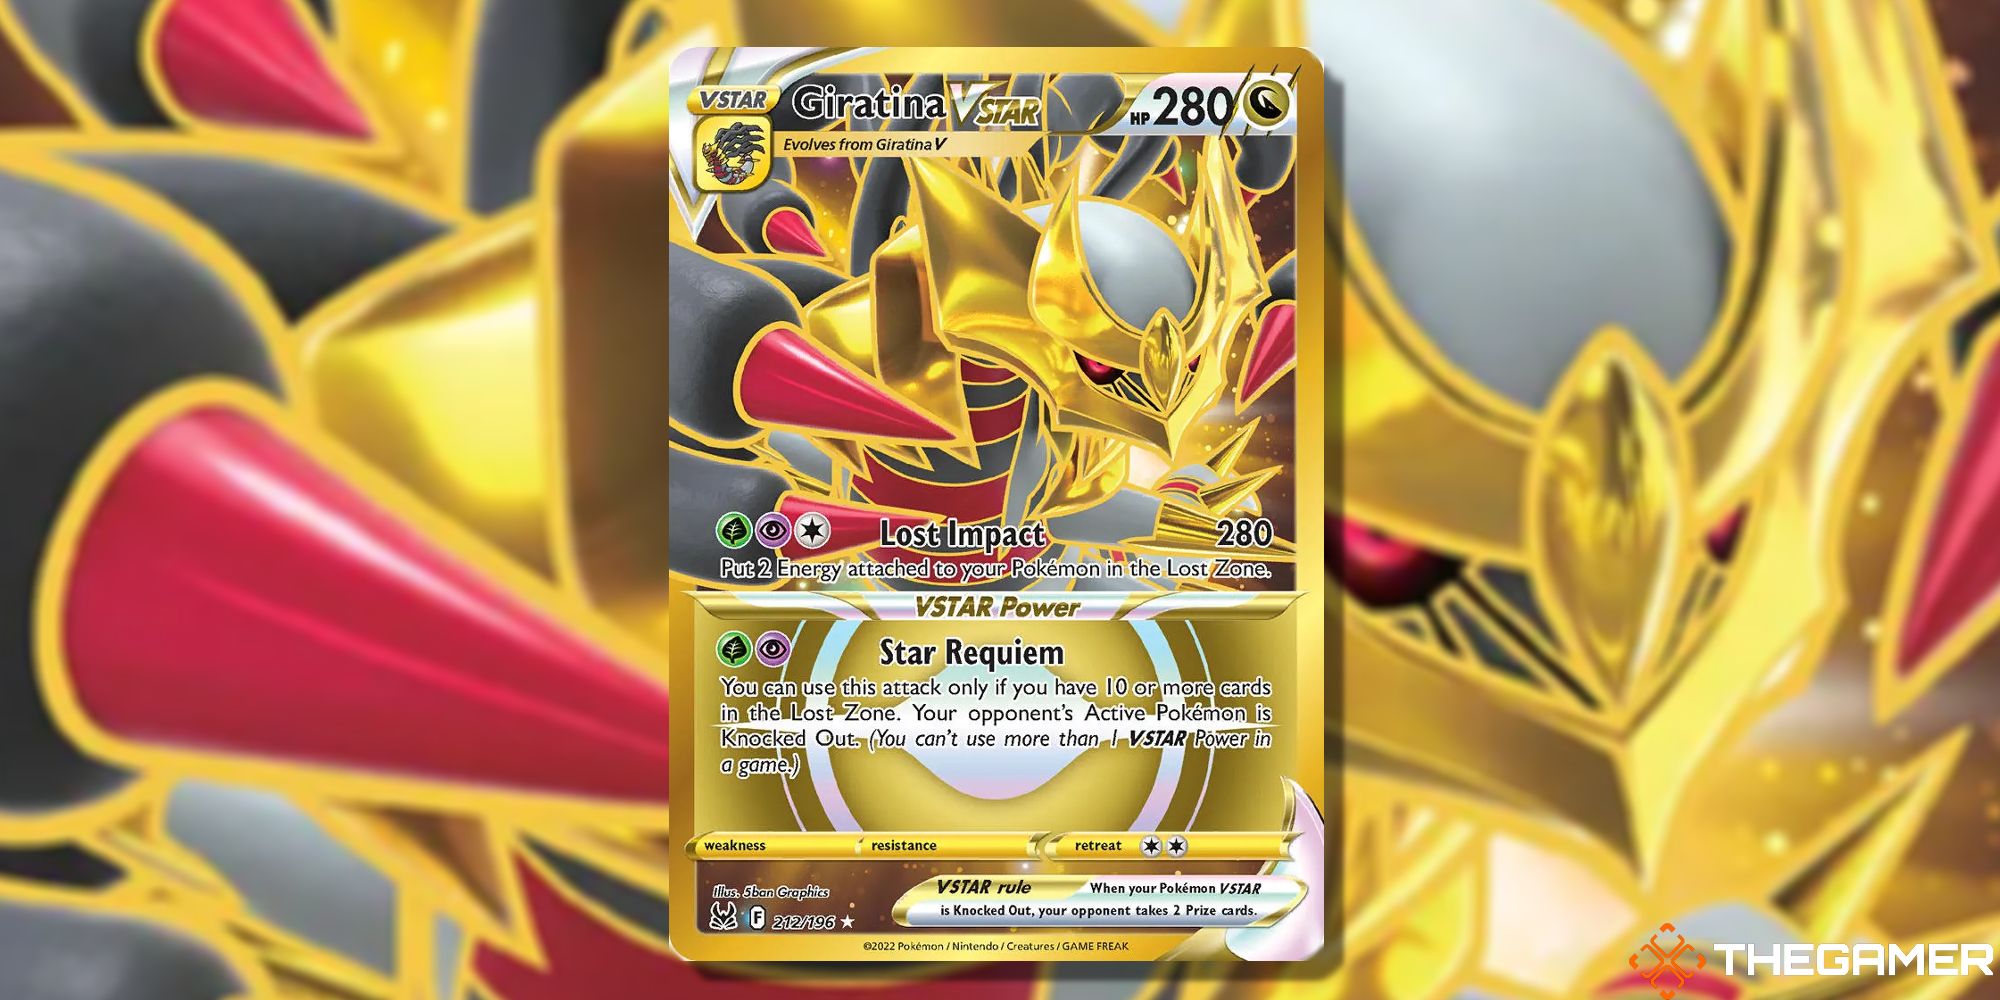 Image of the card Giratina VSTAR in Pokemon TCG, with art by 5ban Graphics